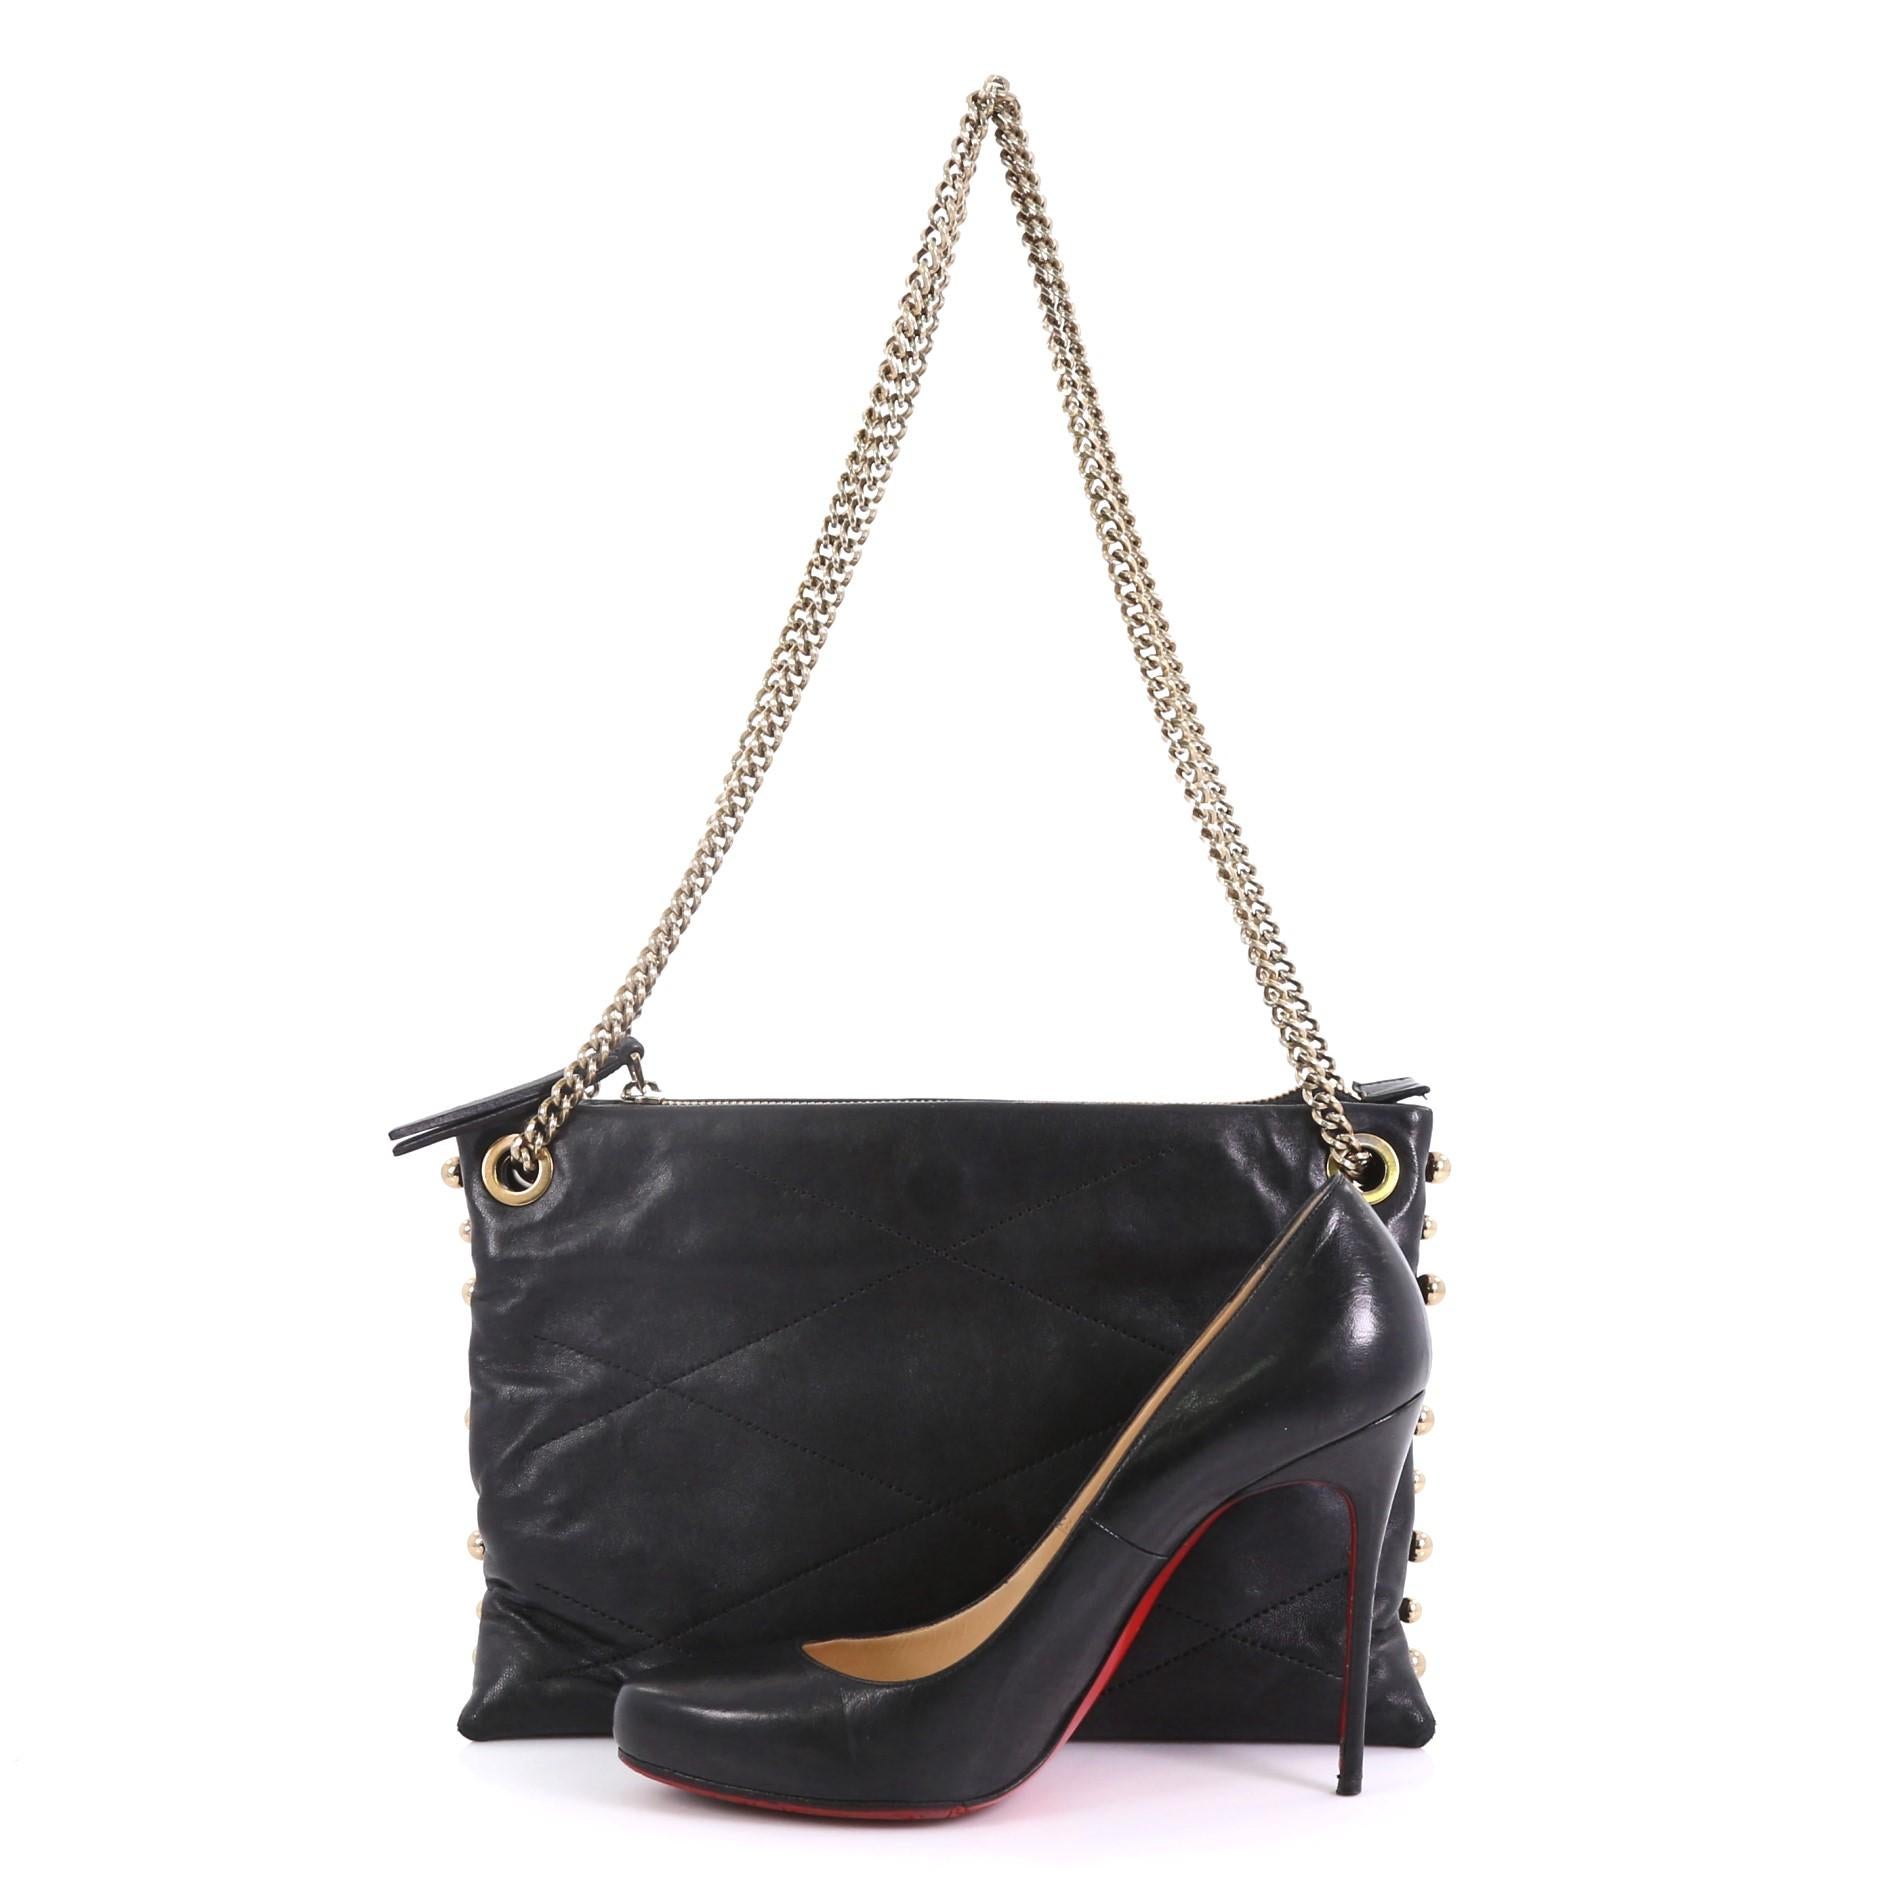 This Lanvin Sugar Shoulder Bag Quilted Leather Small, crafted from black quilted leather, features chain link strap, stud details, three compartments, and gold-tone hardware. Its middle zip closure opens to a gold fabric interior with zip pocket.